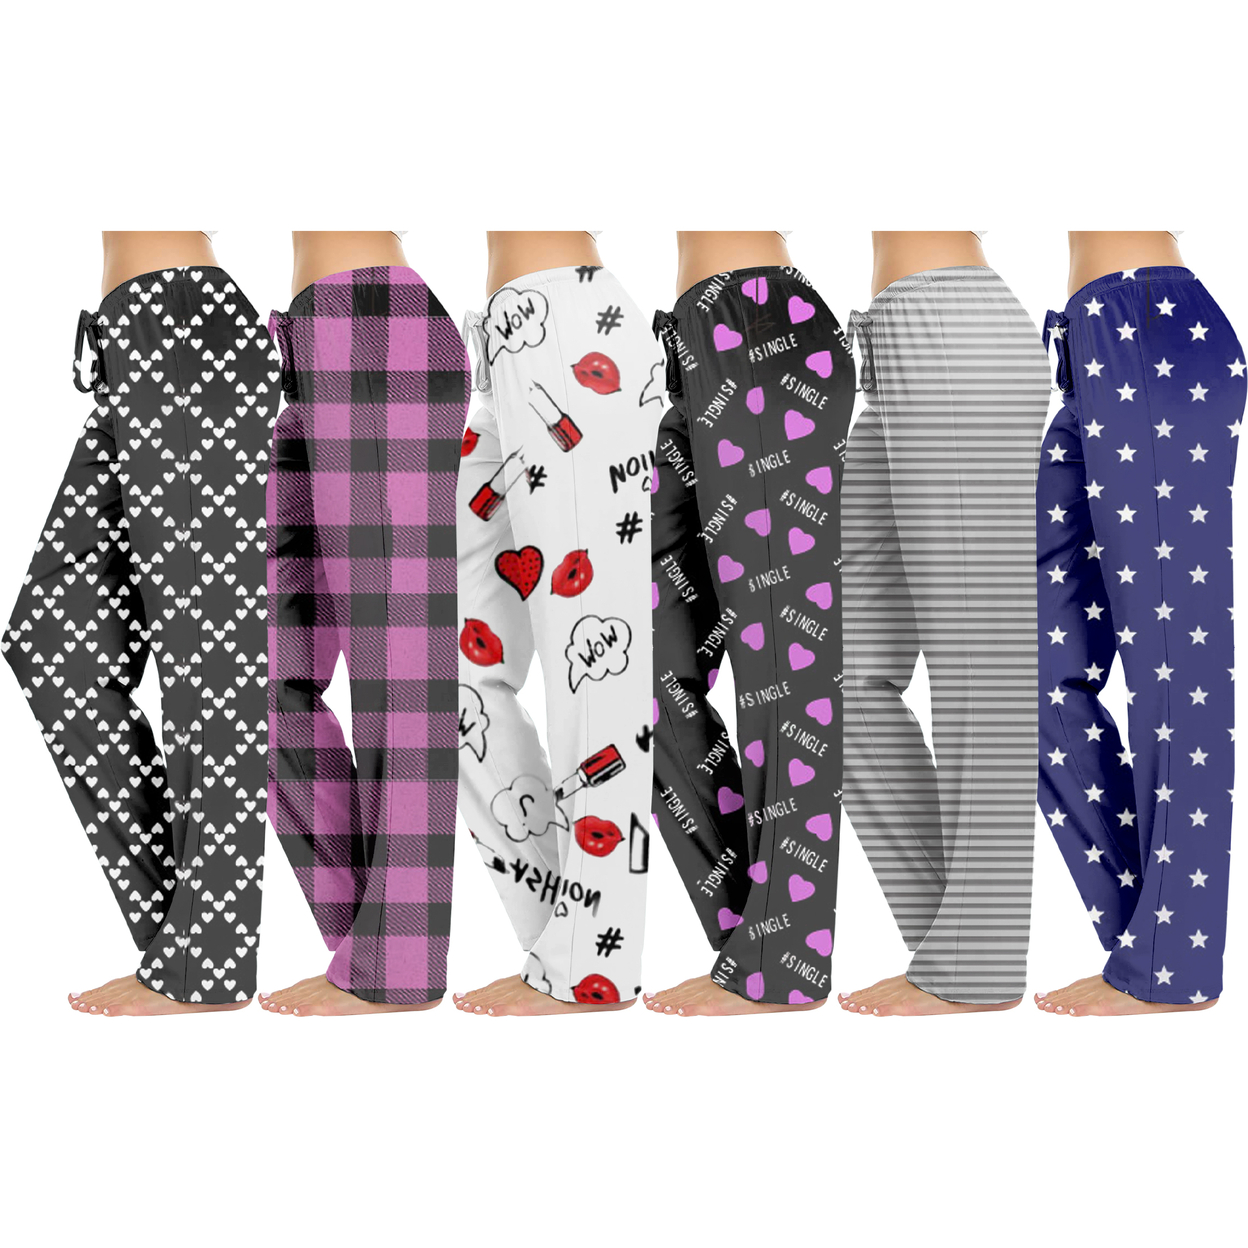 5-Pack: Women's Casual Fun Printed Lightweight Lounge Terry Knit Pajama Bottom Pants - Large, Shapes